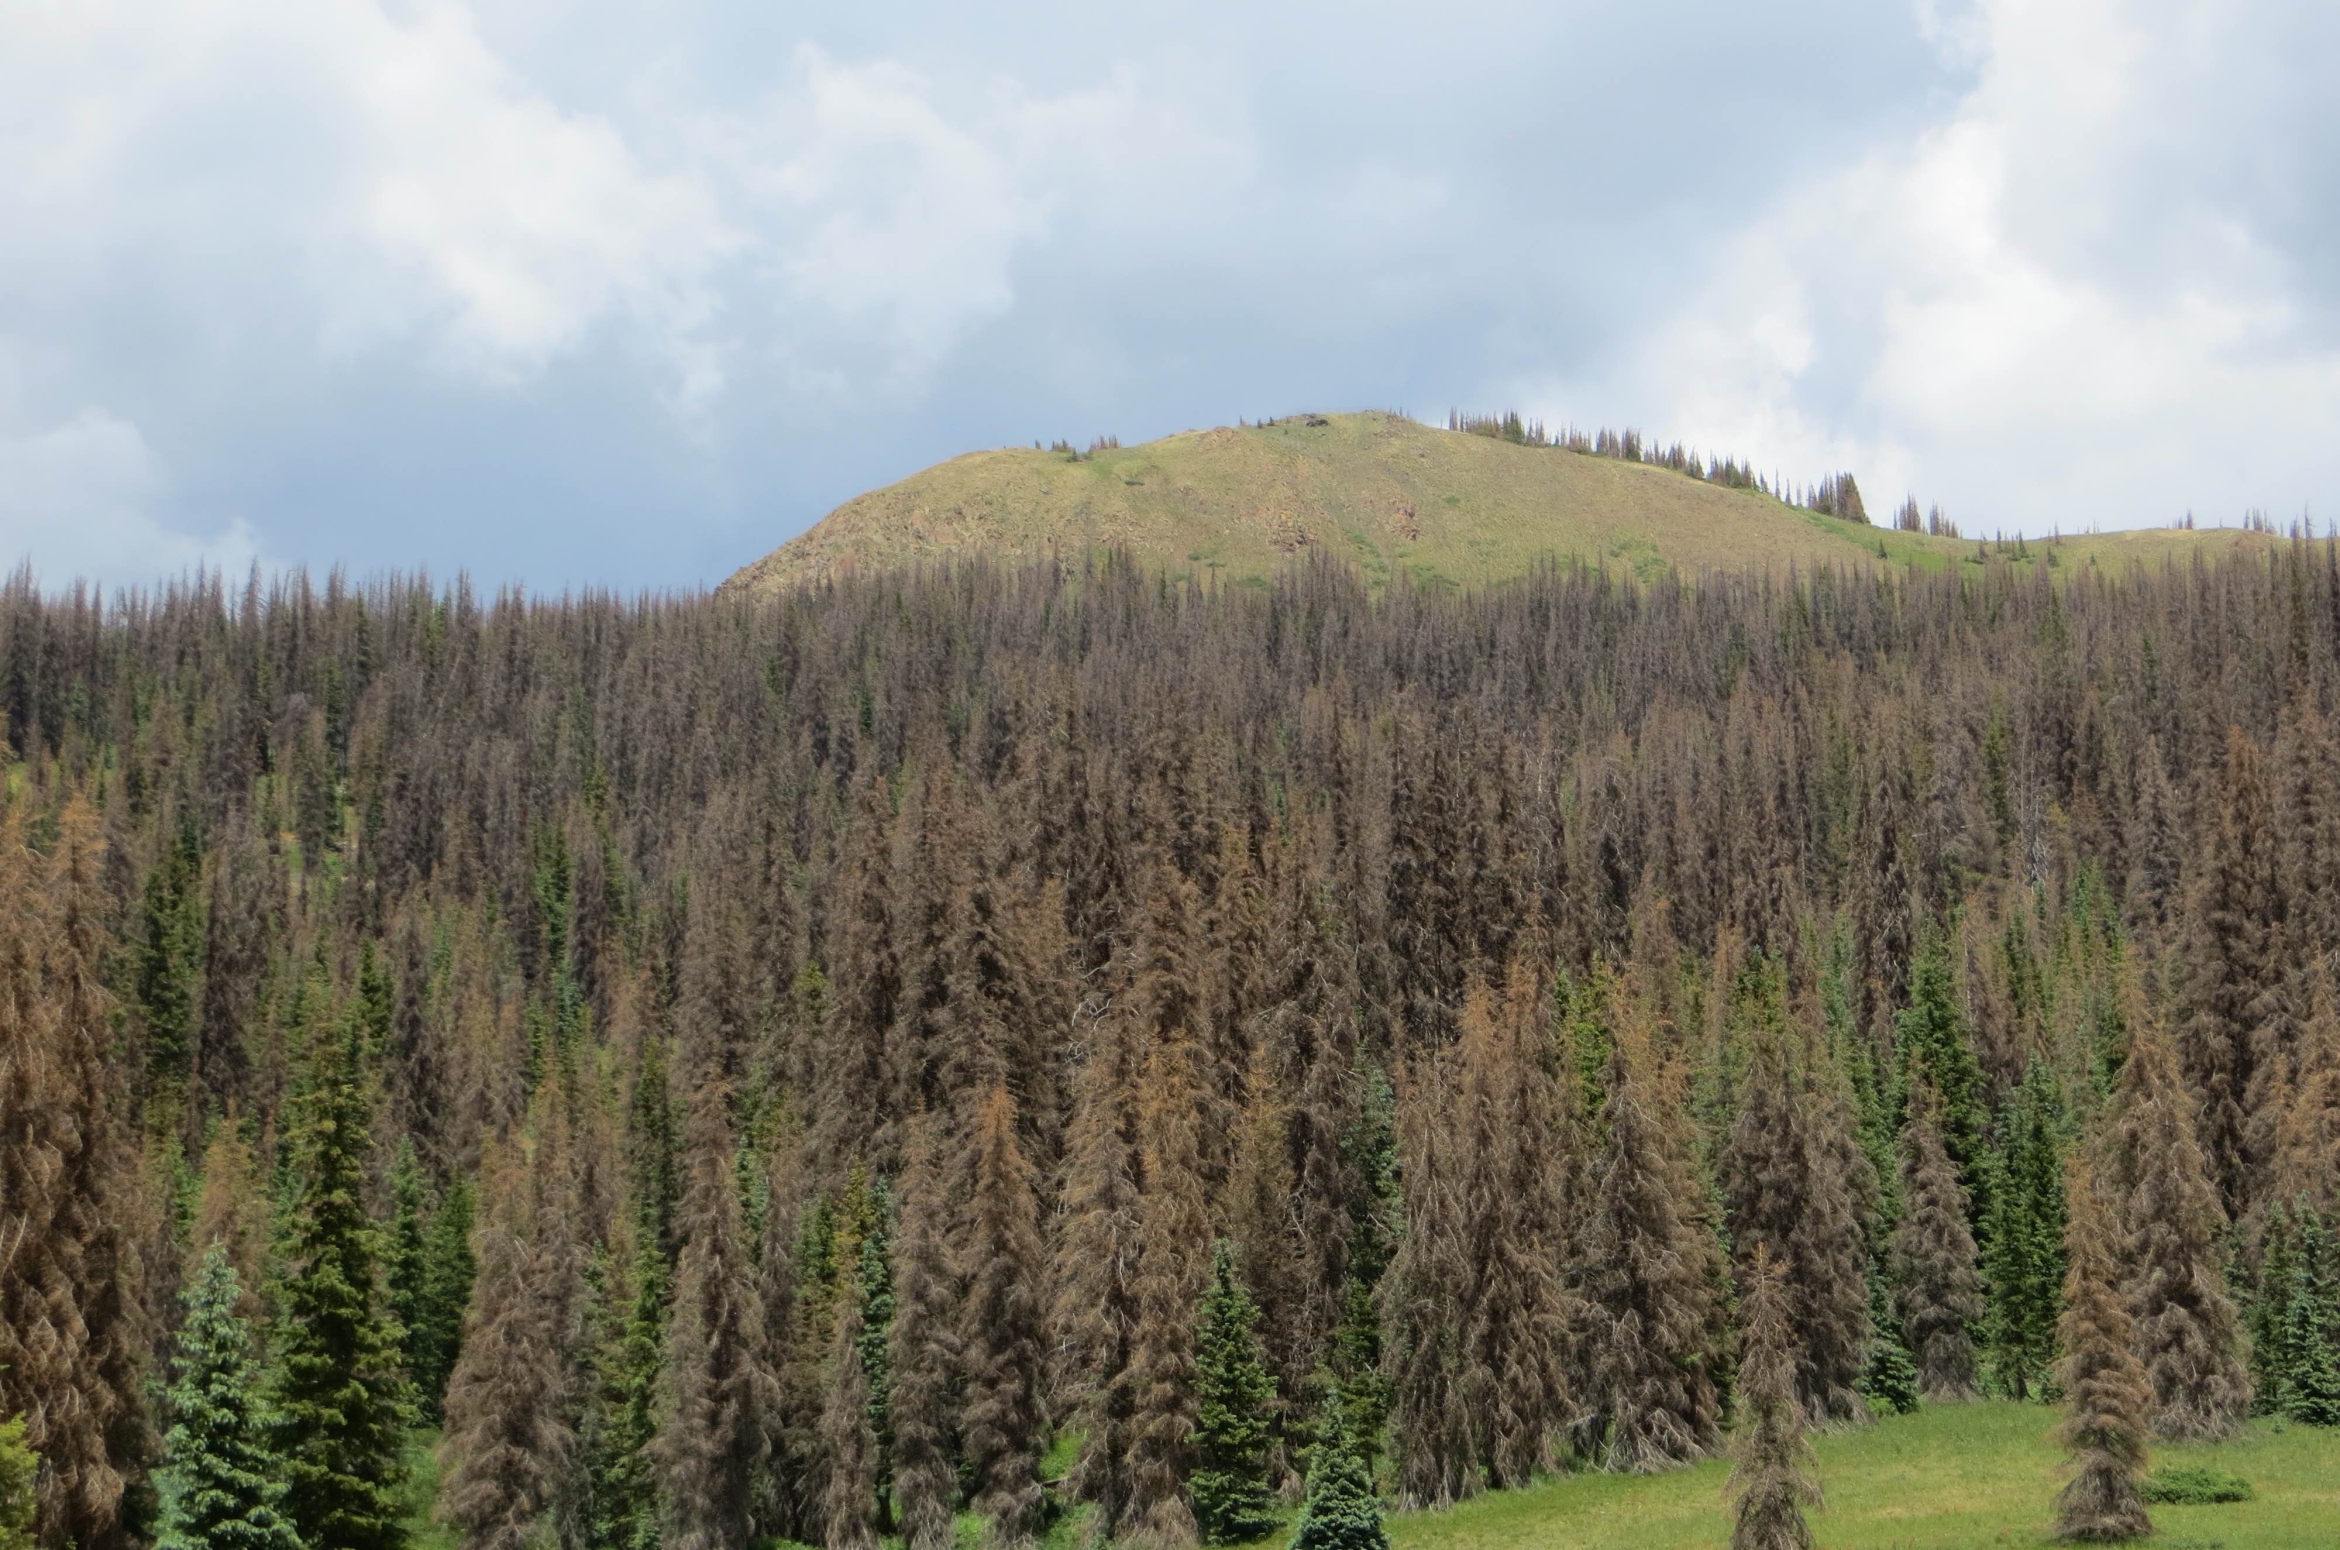 Stressed pines on a hill in southwestern Colorado.